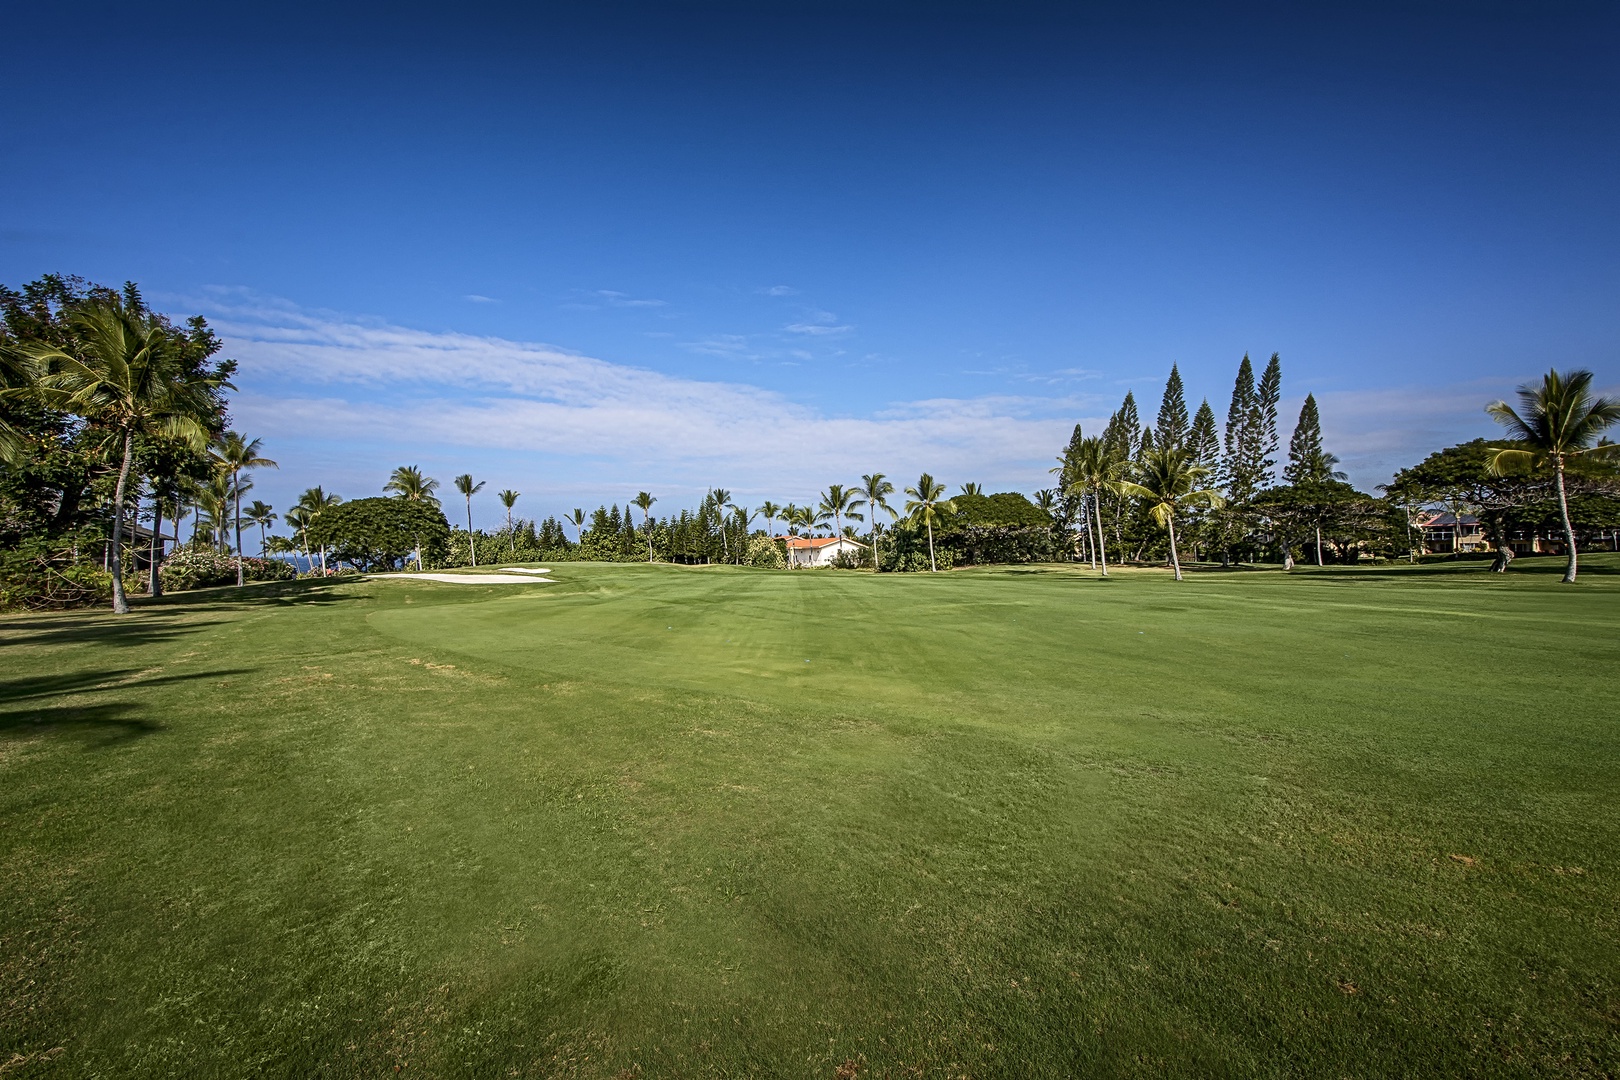 Kailua Kona Vacation Rentals, Kanaloa at Kona 701 - In addition to 1,600 acres of tropical landscaping overlooking Keauhou Bay, this property has golf course views, two resurfaced tennis courts and three sparkling ocean-facing swimming pools for your maximum enjoyment.